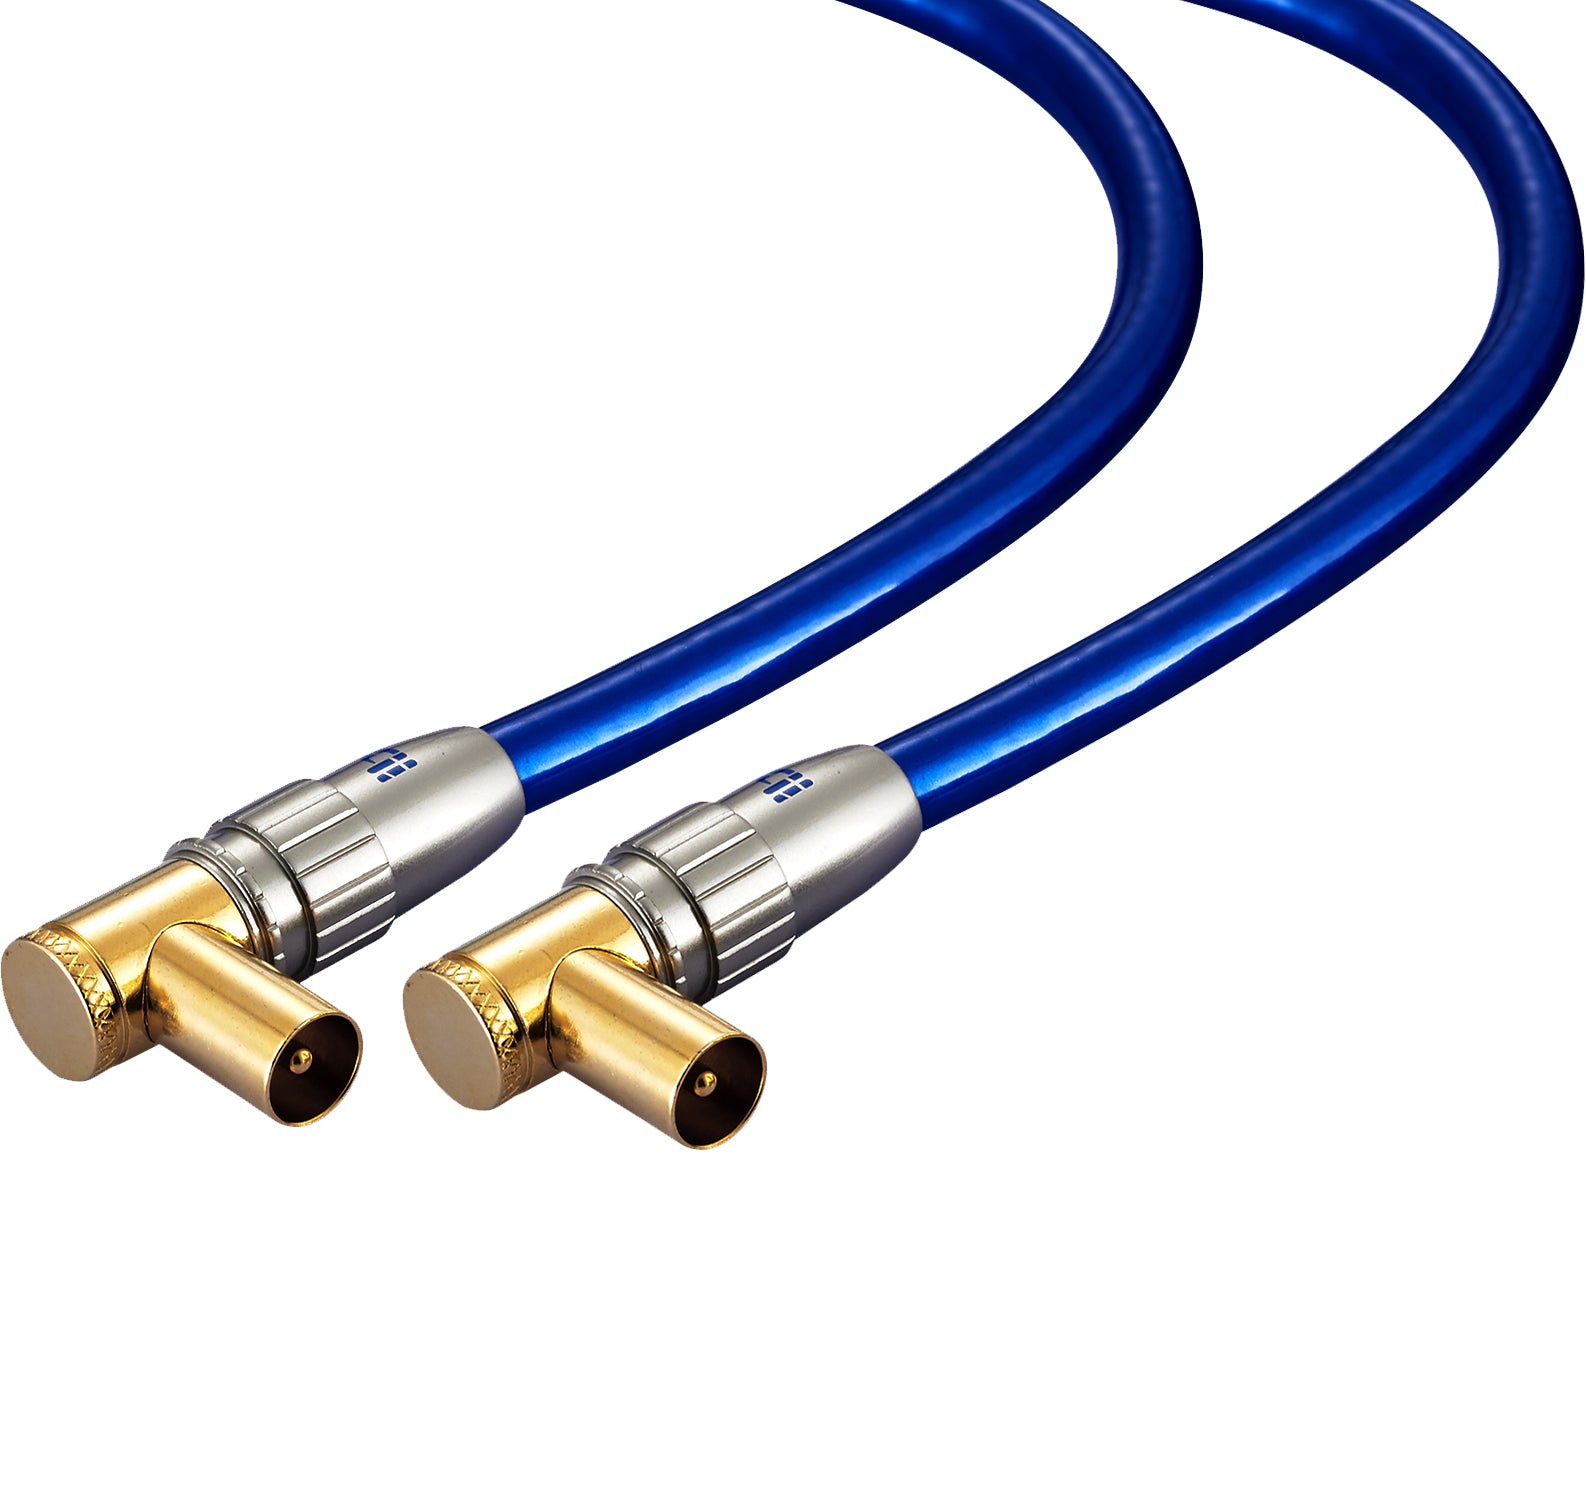 IBRA 10m HDTV Antenna Cable | TV Aerial Cable with 90 Degree Right Angled Connectors | Premium Freeview Coaxial Cable | 90° Angled Connectors: Coax Male to Male | For UHV/UHF/RF DVB-T1/T2